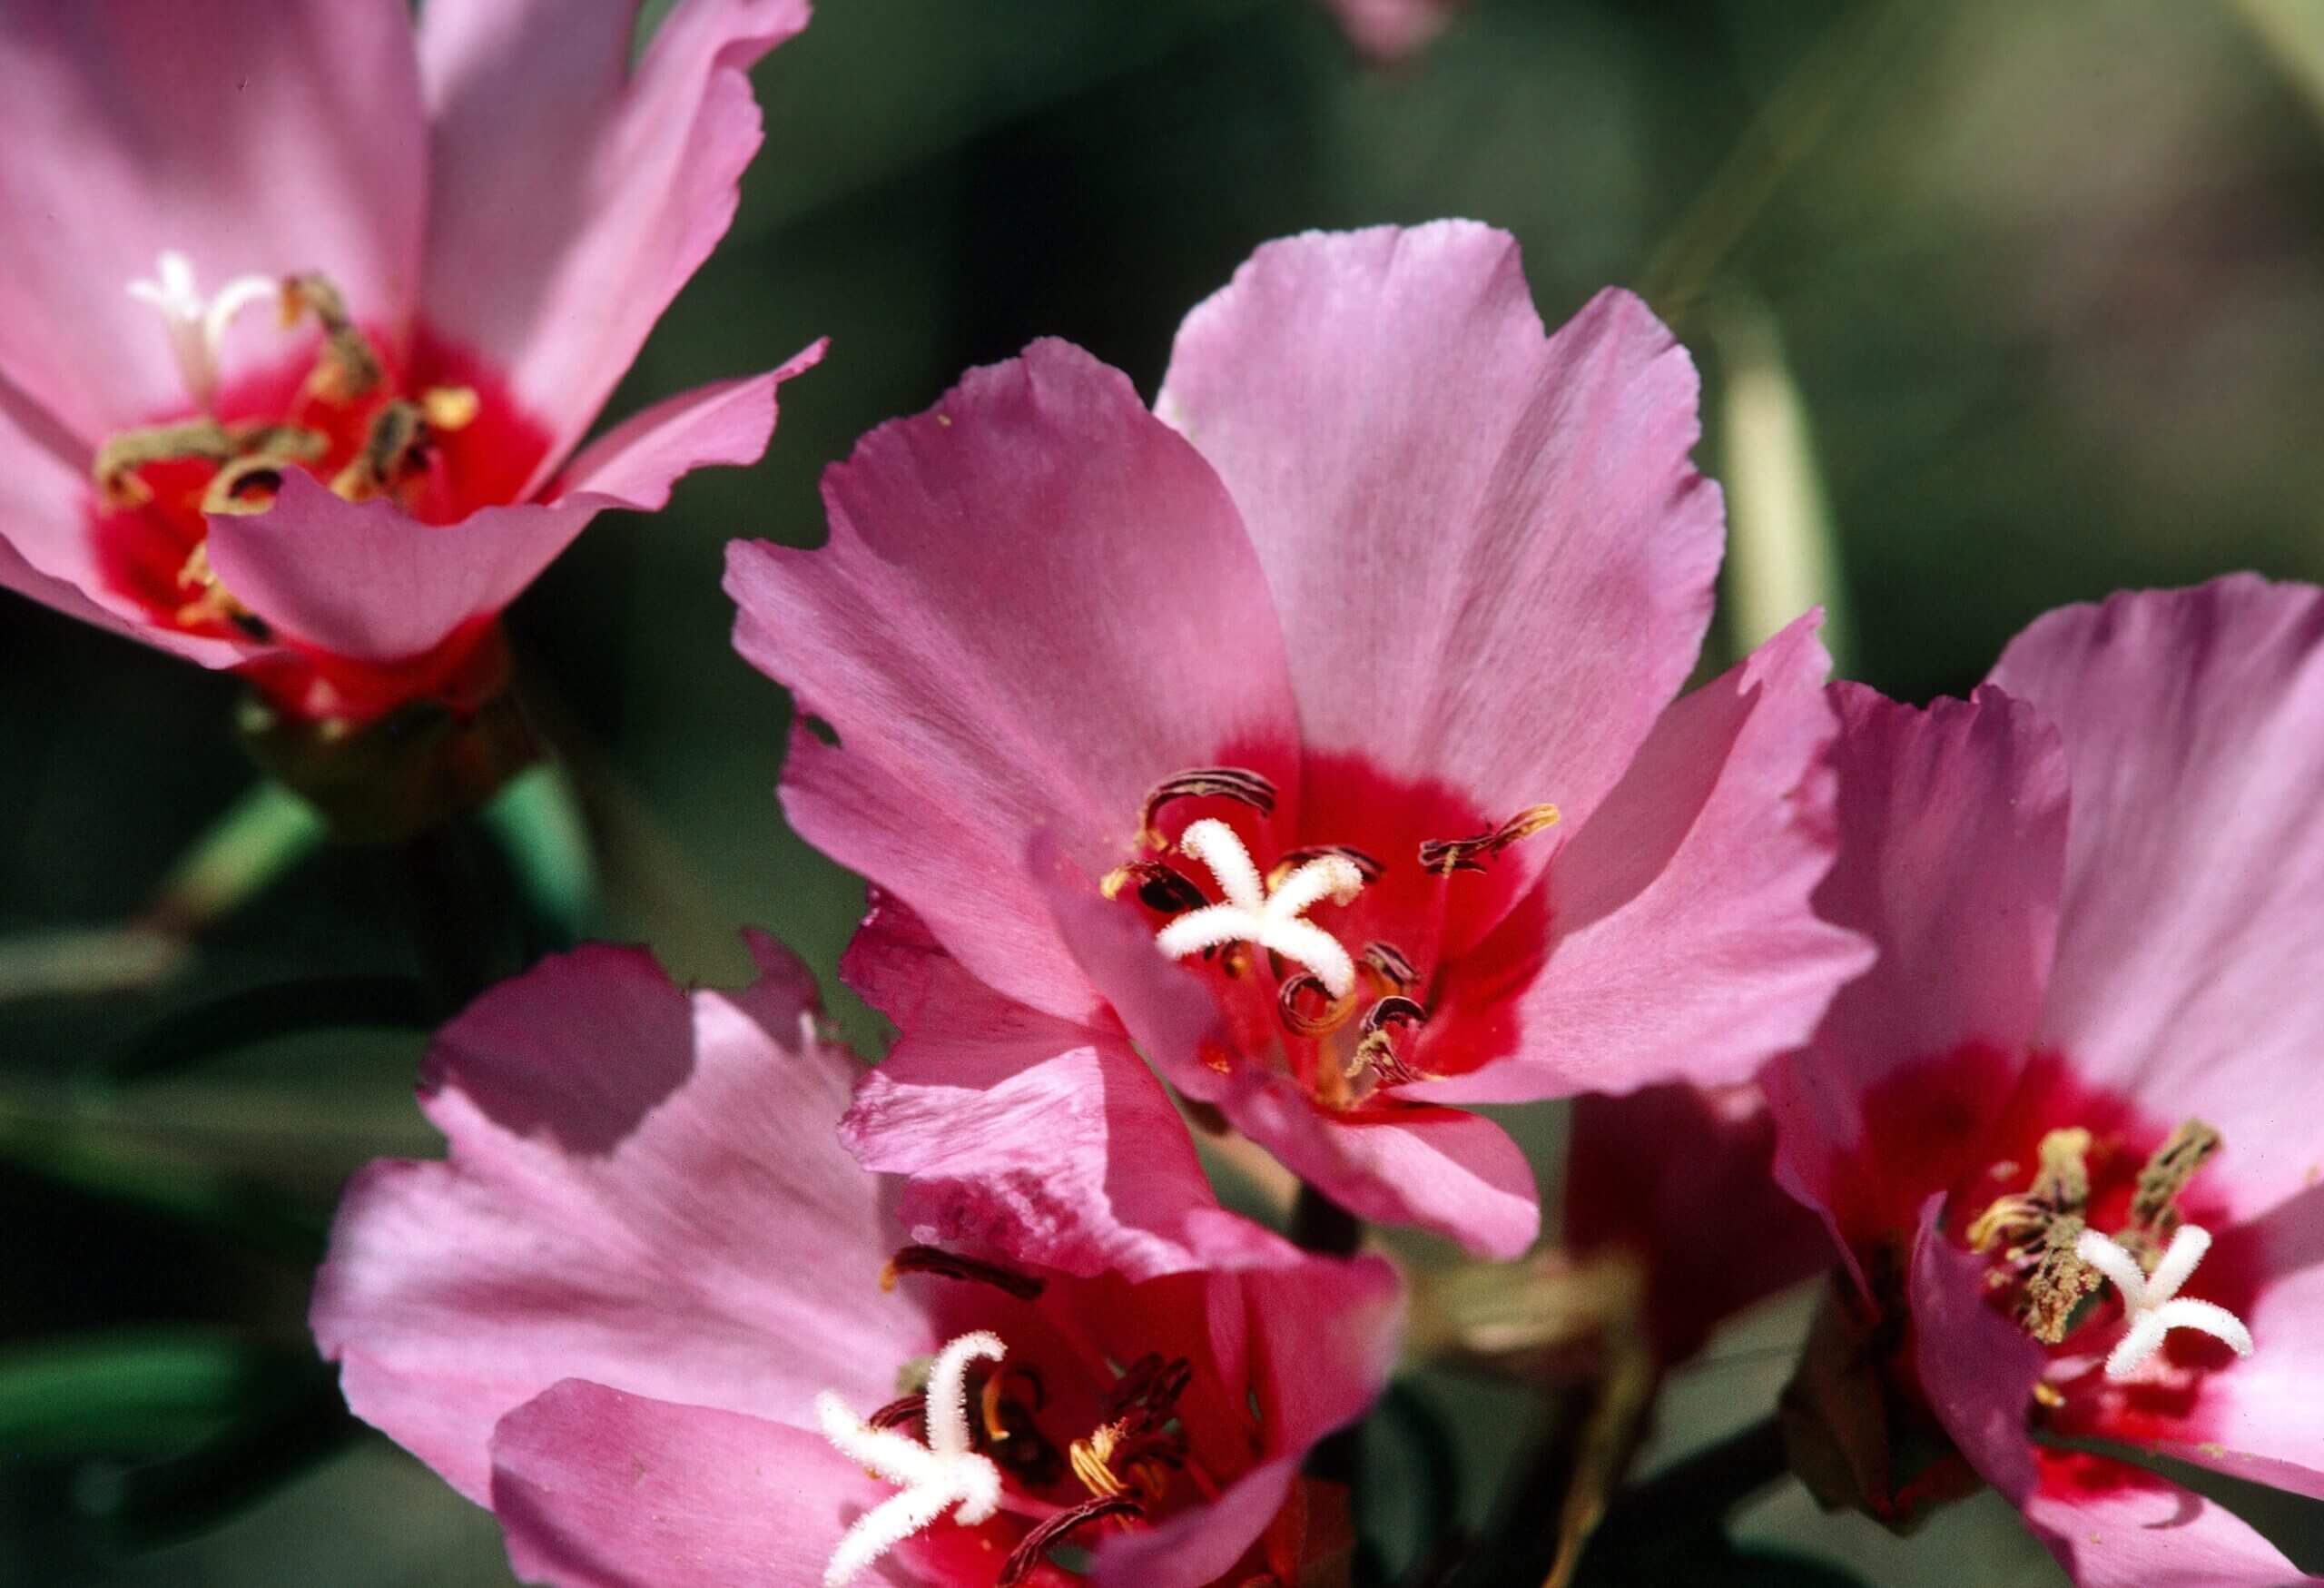 Ruby chalice clarkia produces prolific but very tiny seeds. Photo: William Follette